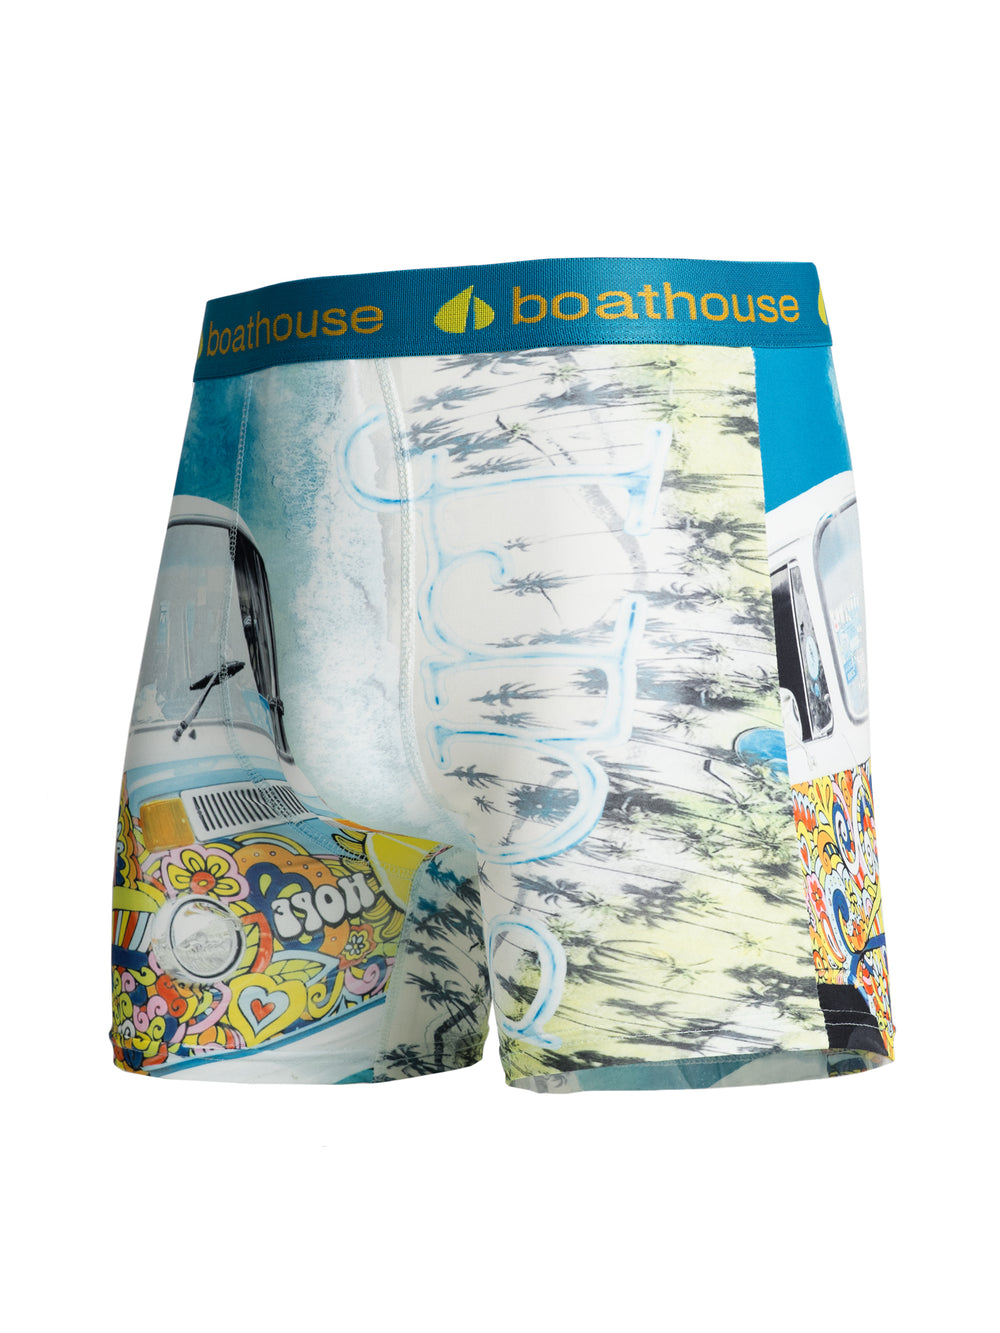 BOATHOUSE NOVELTY BOXER BRIEF - HIPPIE VAN - CLEARANCE